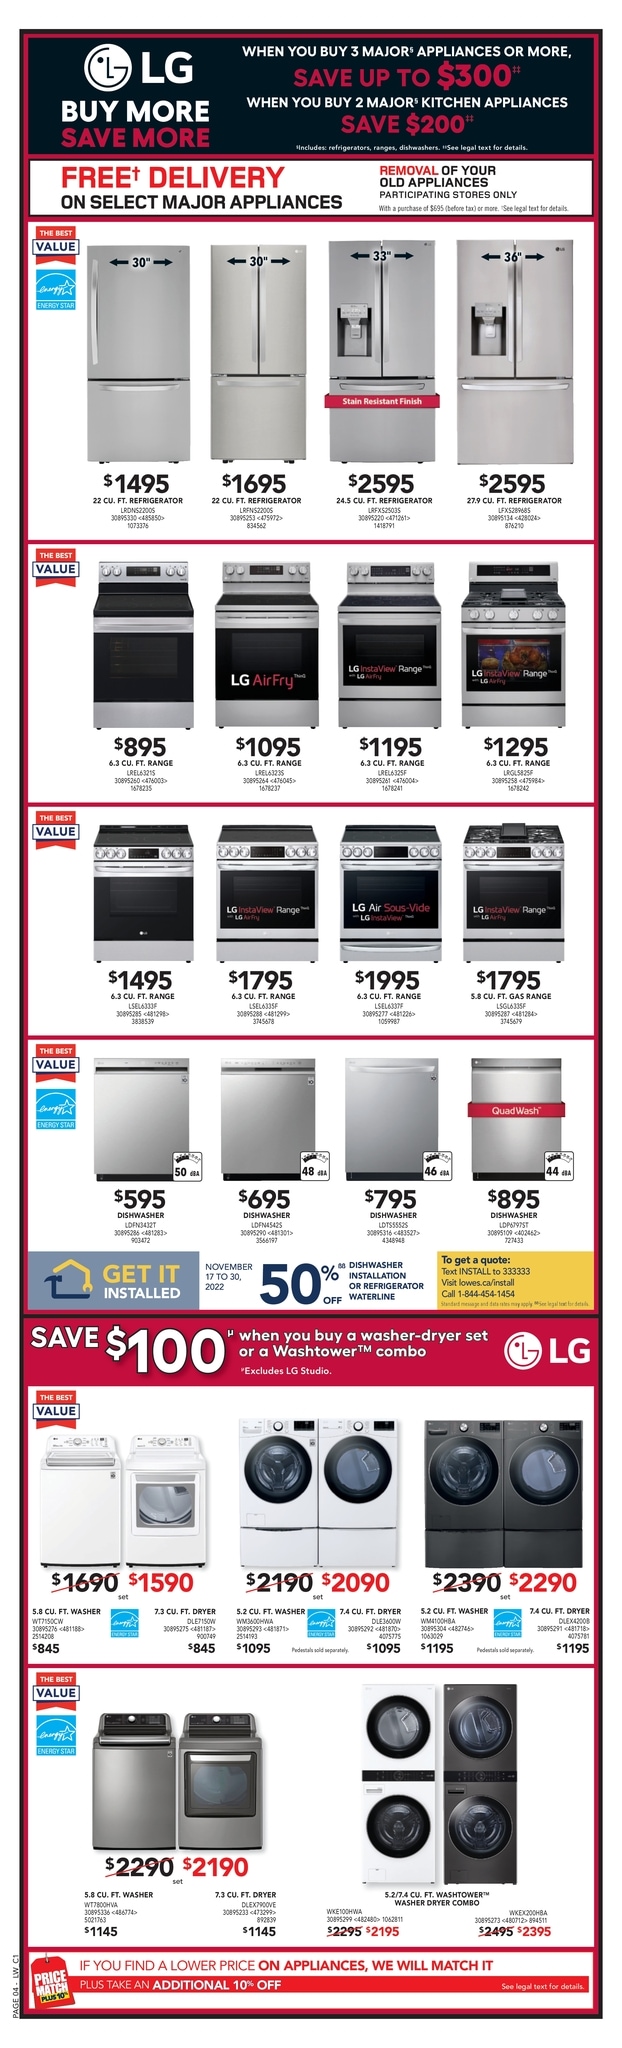 LOWE'S - Weekly Flyer Specials - Black Friday - Page 6